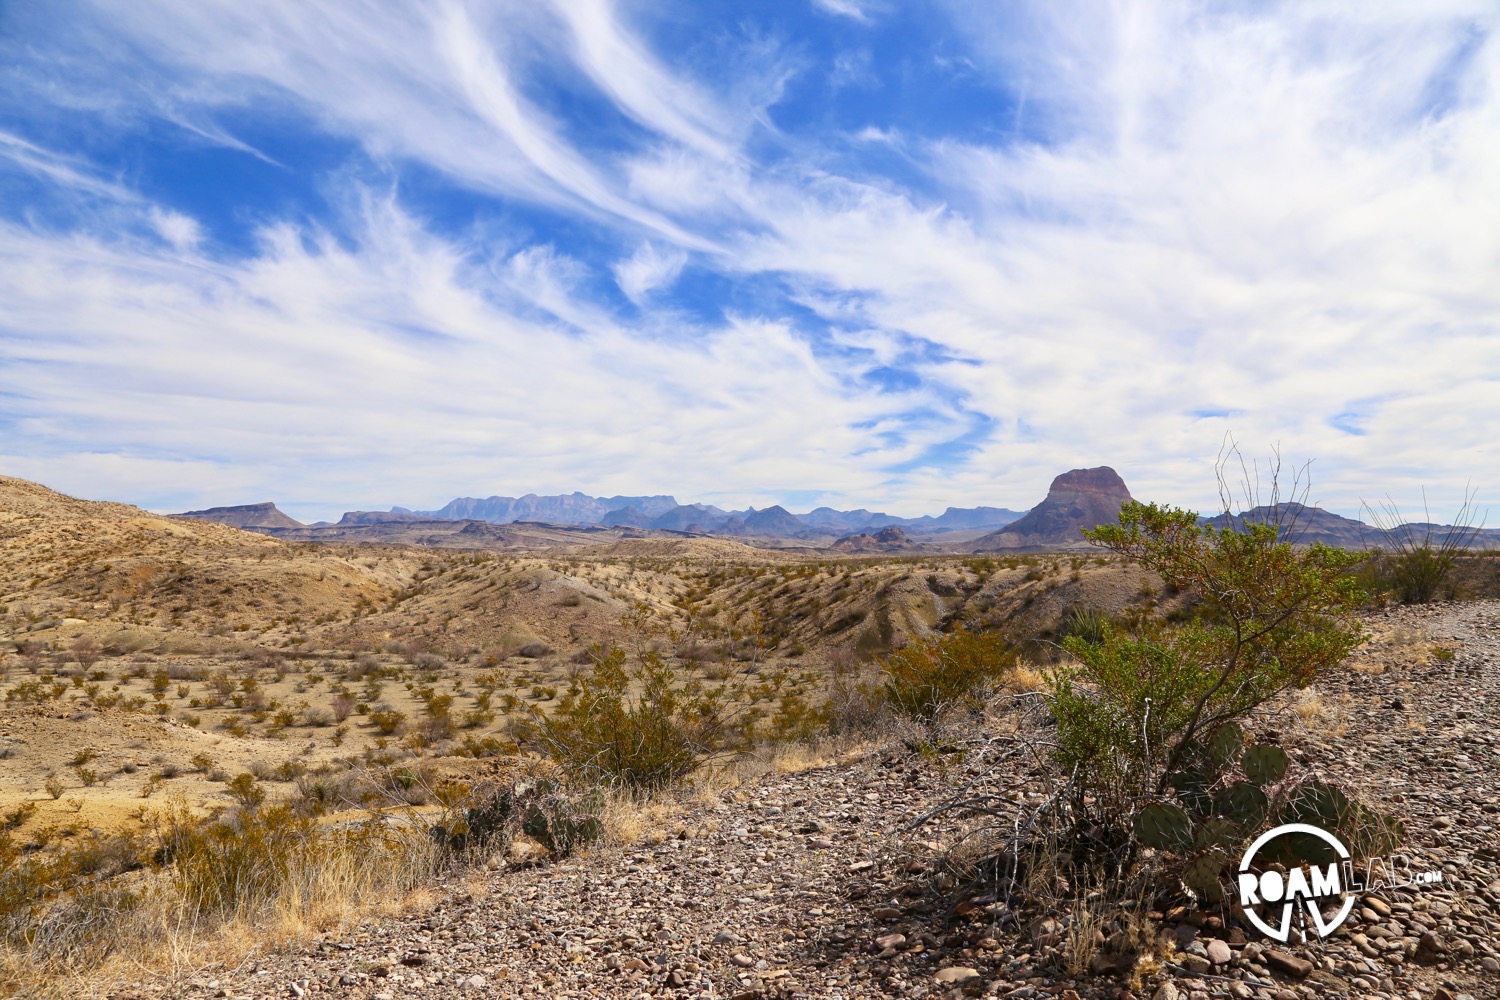 Big Bend National Park is a dramatic Texas Wilderness, the beauty of which is completely lost one me.